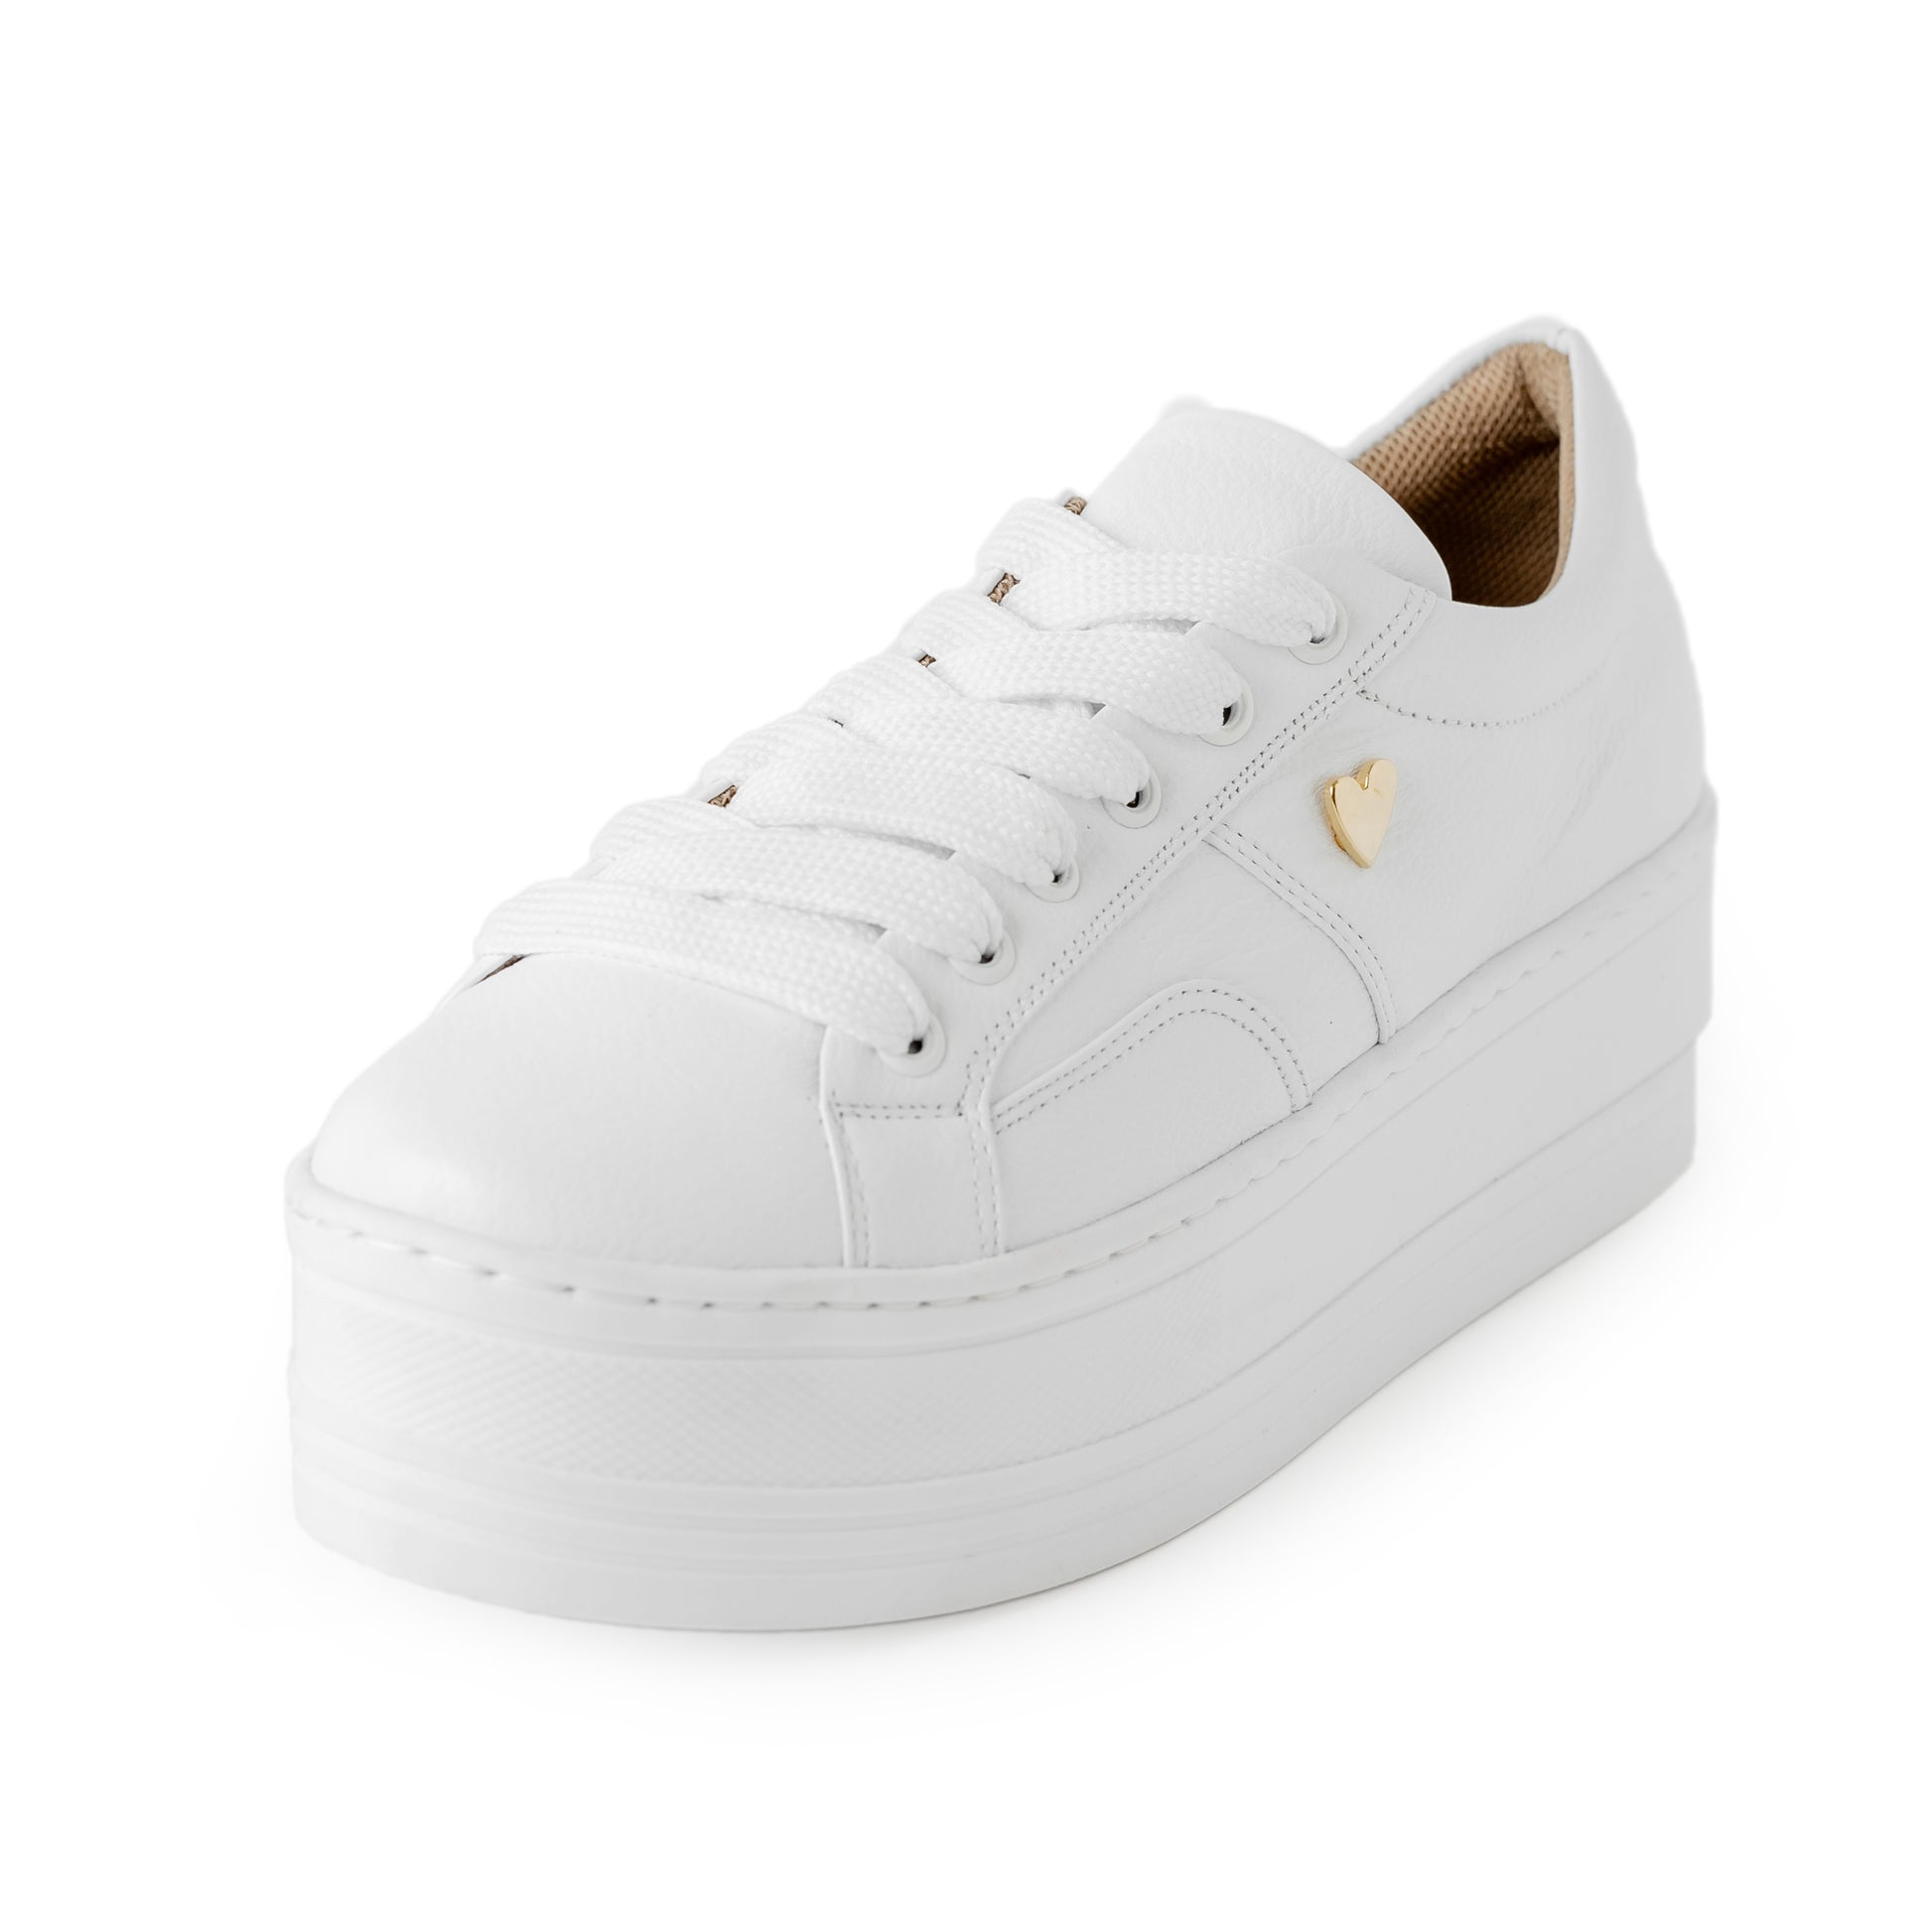 Hannan Sneakers by Nataly Mendez FEATURES Genuine leather upper material Genuine leather insole lining Rubber platform lining Flexible rubber outsole Handmade 1.75 inch heel height 1 inch platform